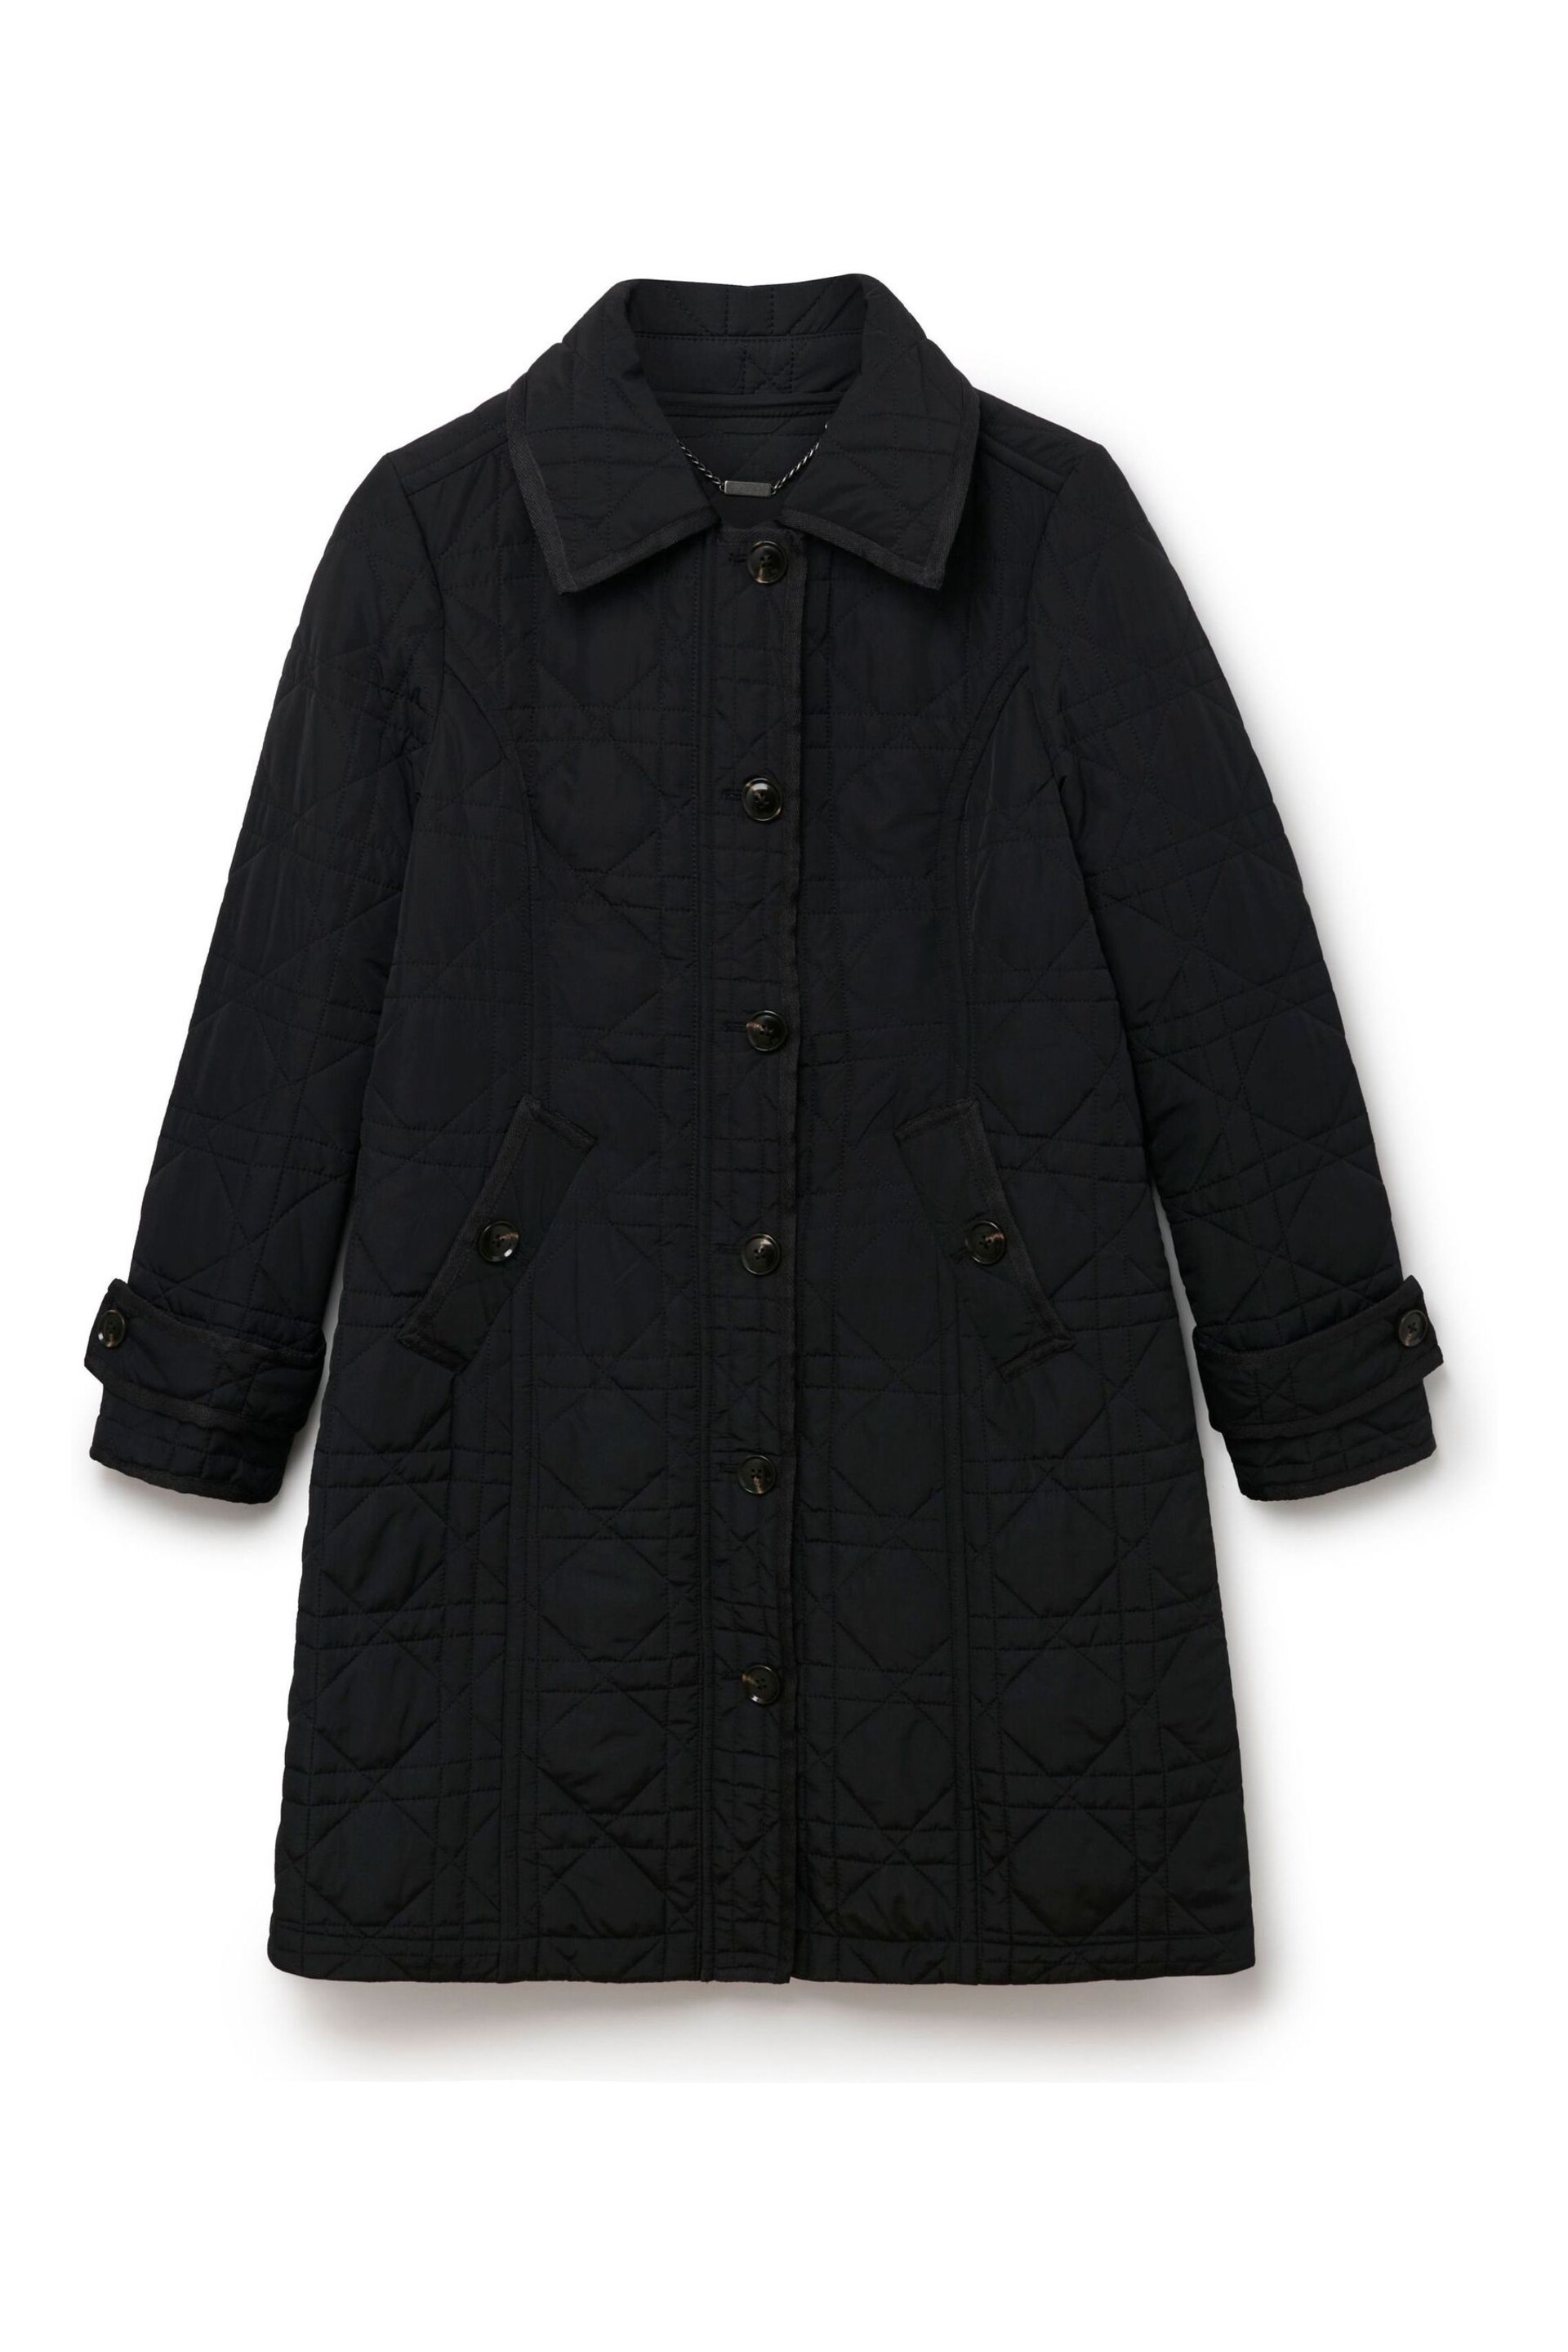 Another Sunday Diamond Quilted Padded Lightweight Midi Coat with Collar In Black - Image 3 of 5